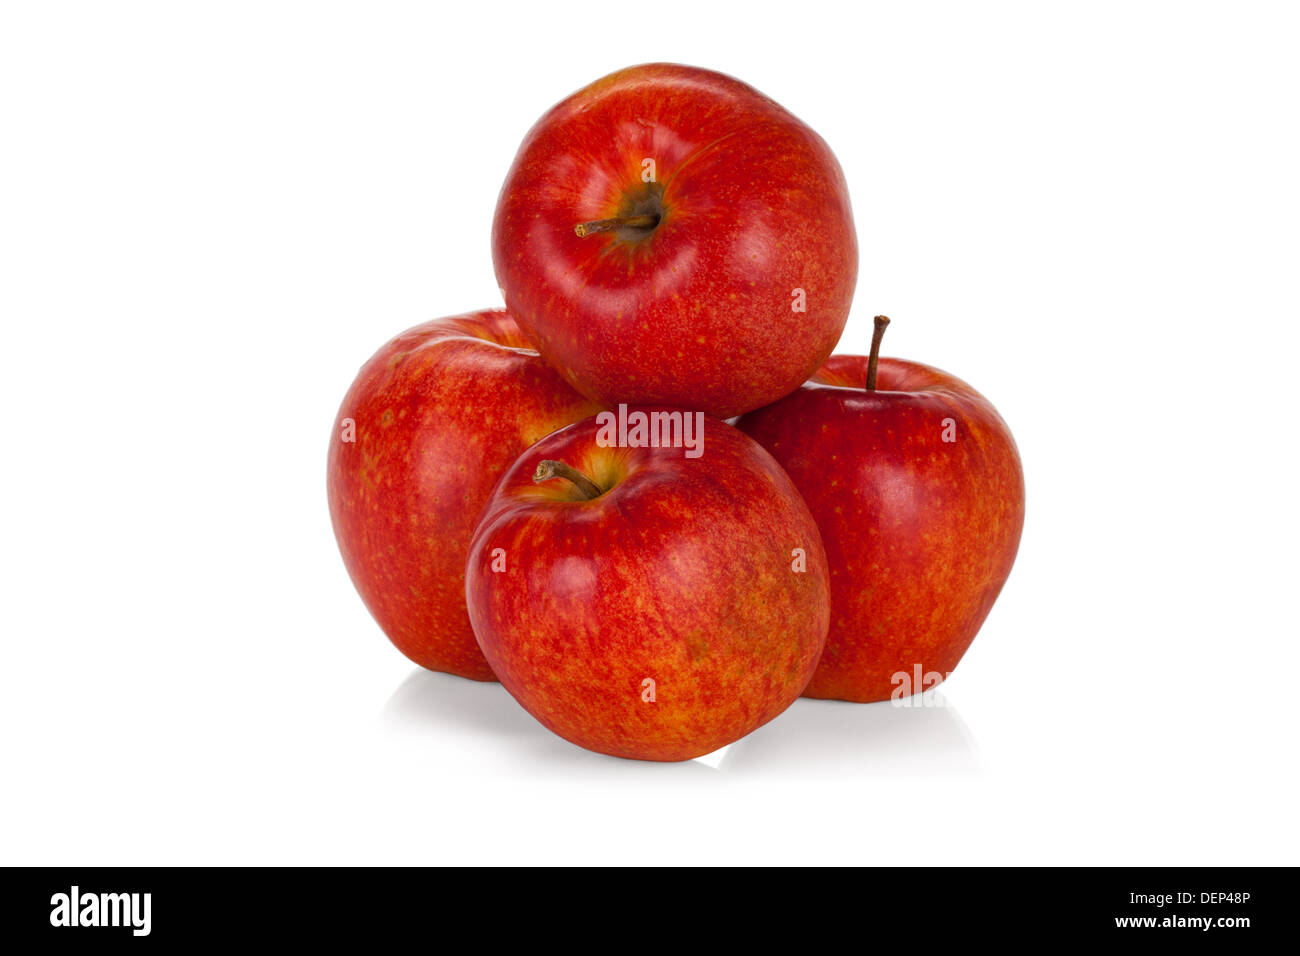 Four red apples isolated on white background Stock Photo